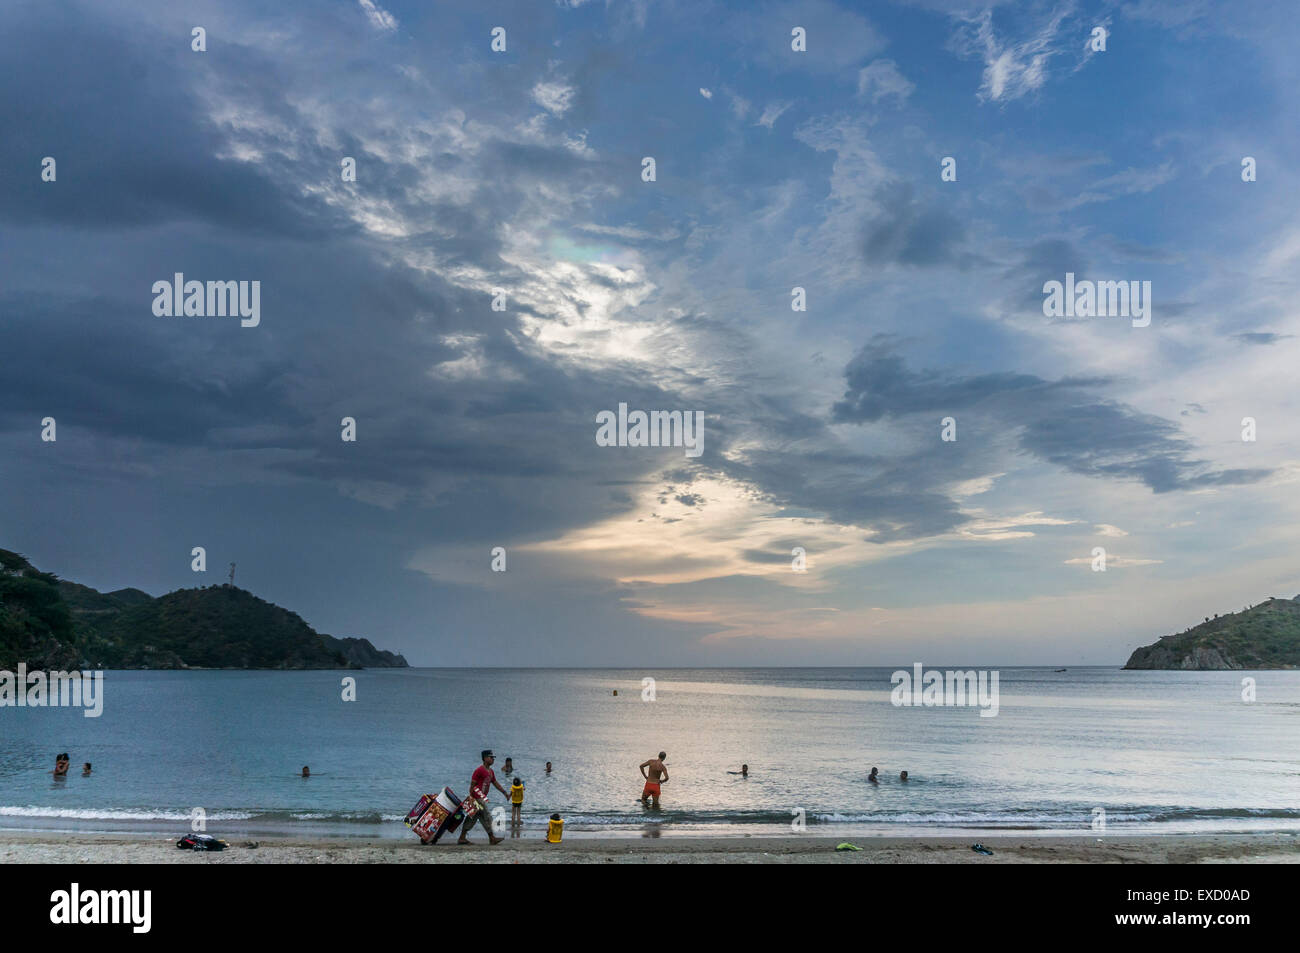 Evening on the beach at Taganga near Santa Marta, Colombia.  The once small fishing village on the Caribbean has become a popula Stock Photo